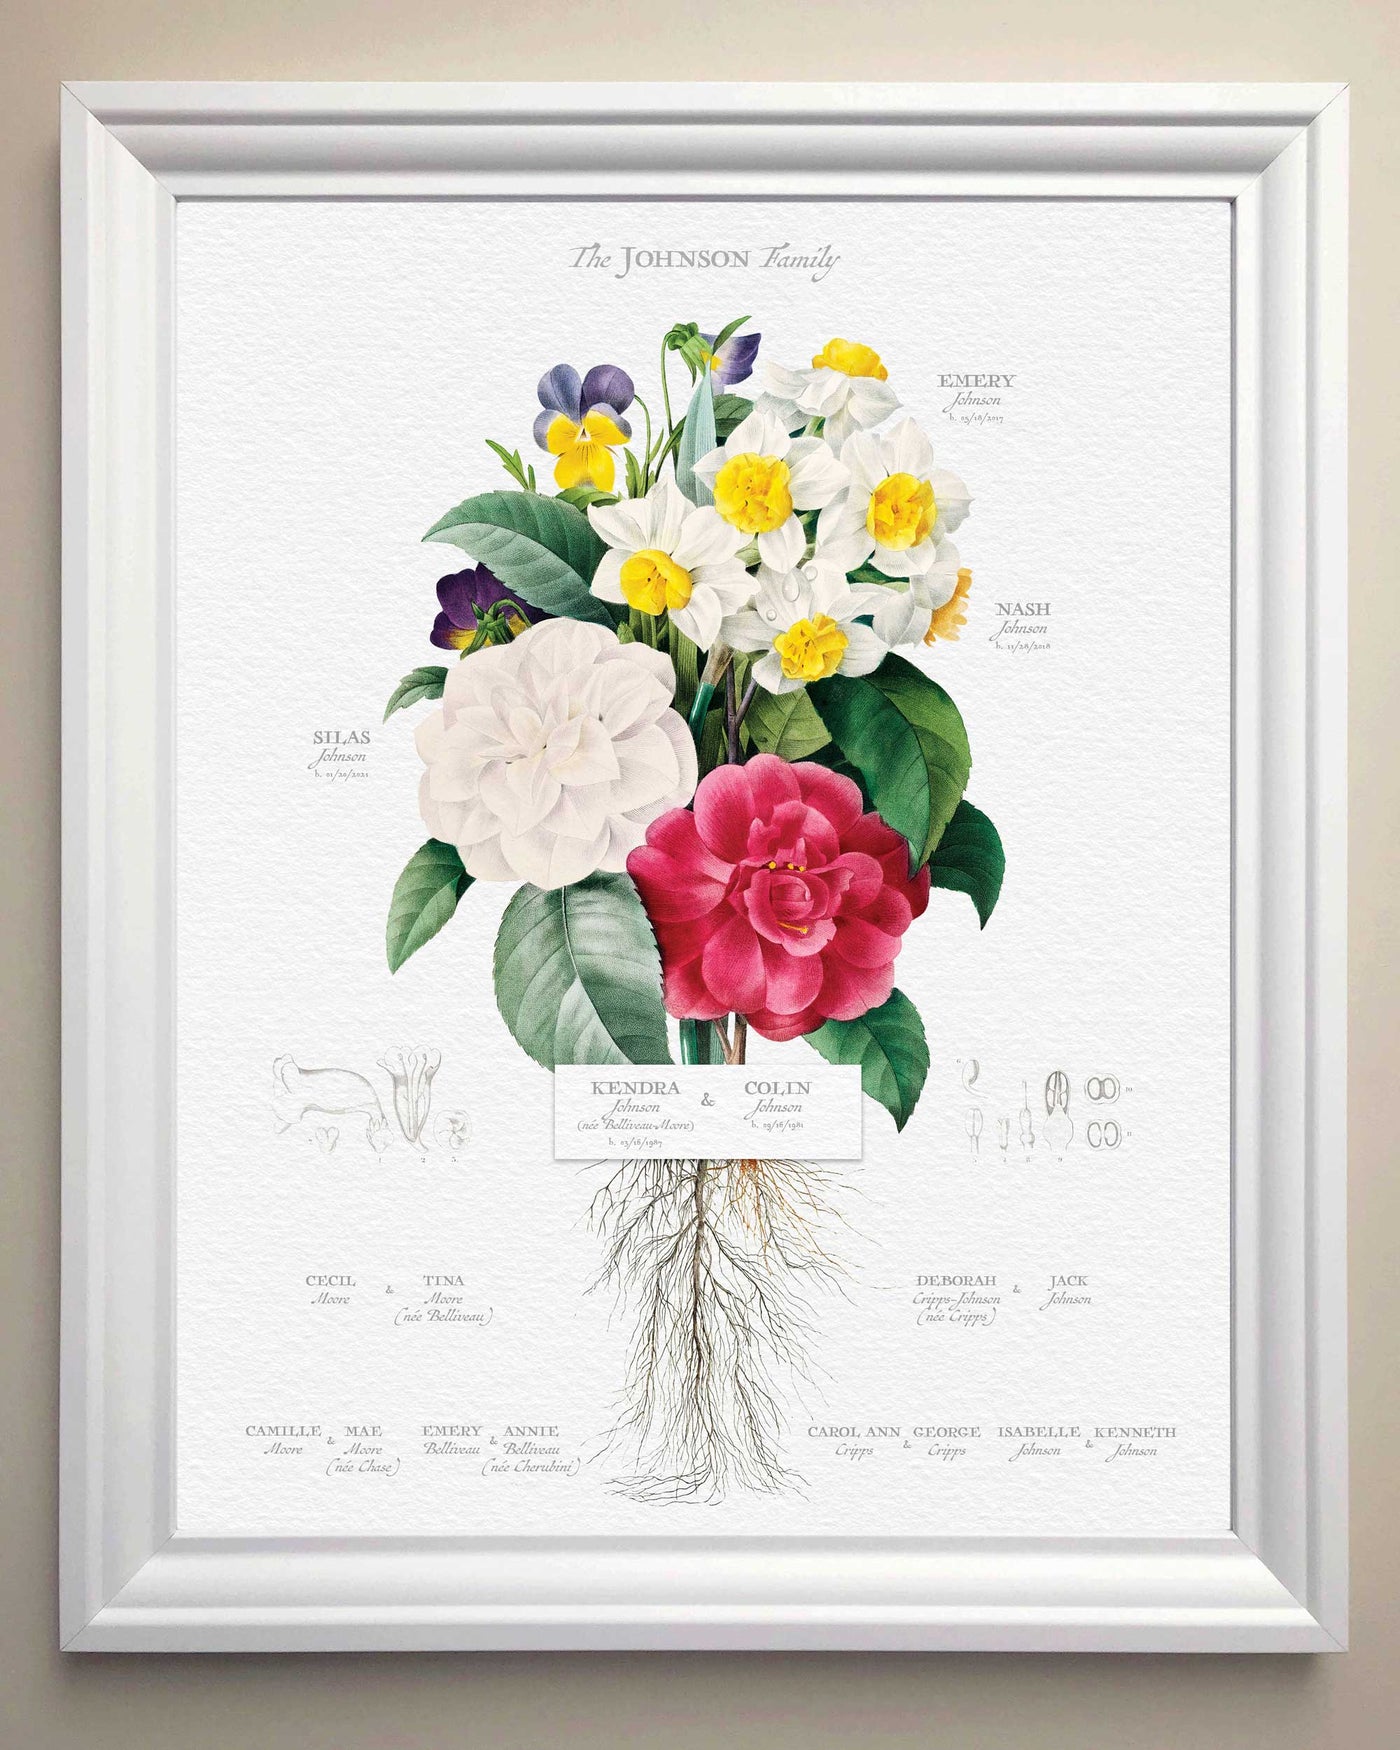 Daffodil and Pansy in the Thick White Frame Family Tree design